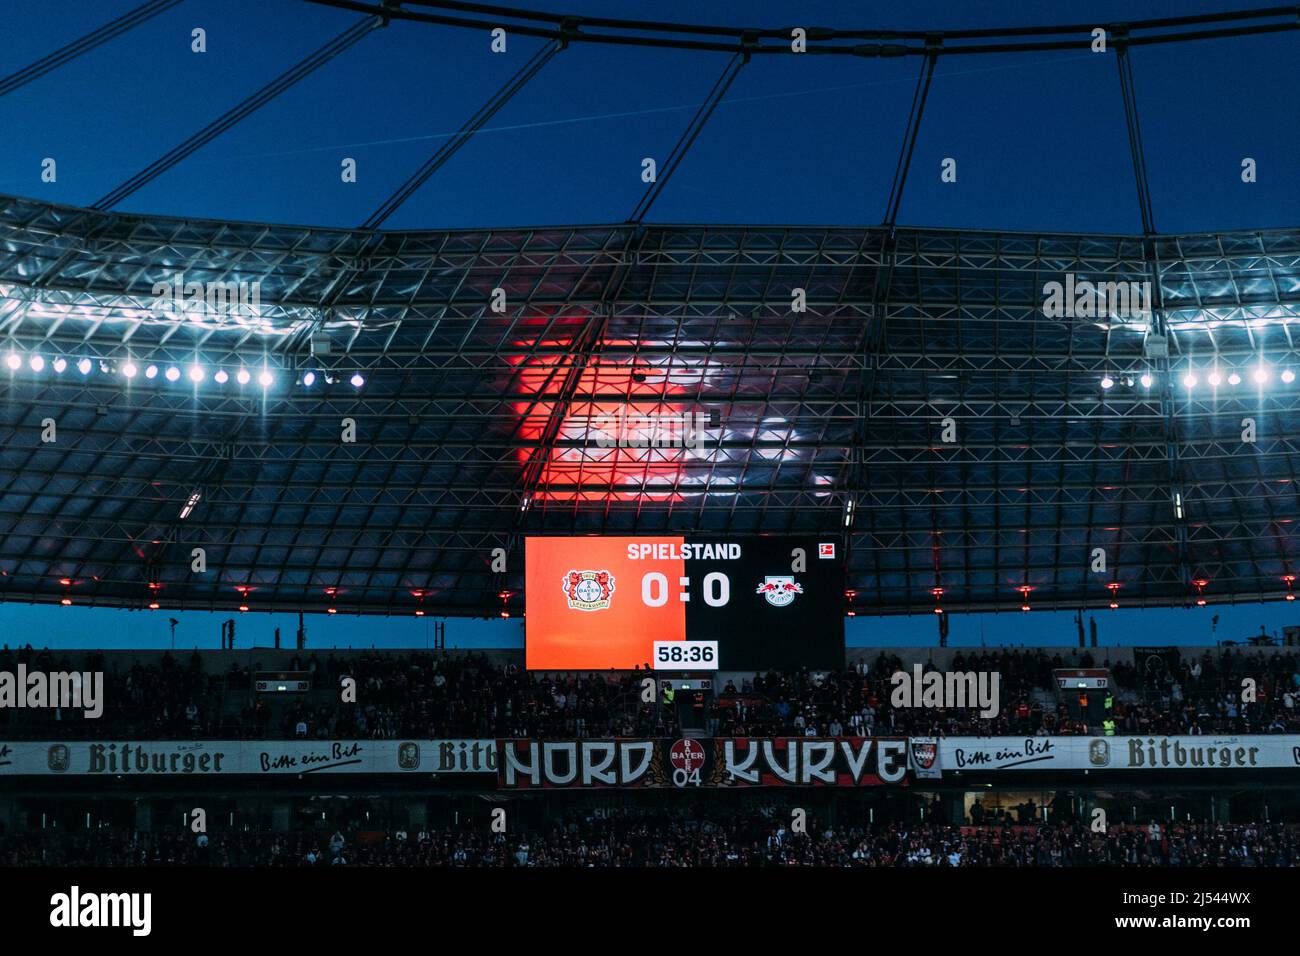 Rb leipzig bayer 04 leverkusen hi-res stock photography and images - Alamy